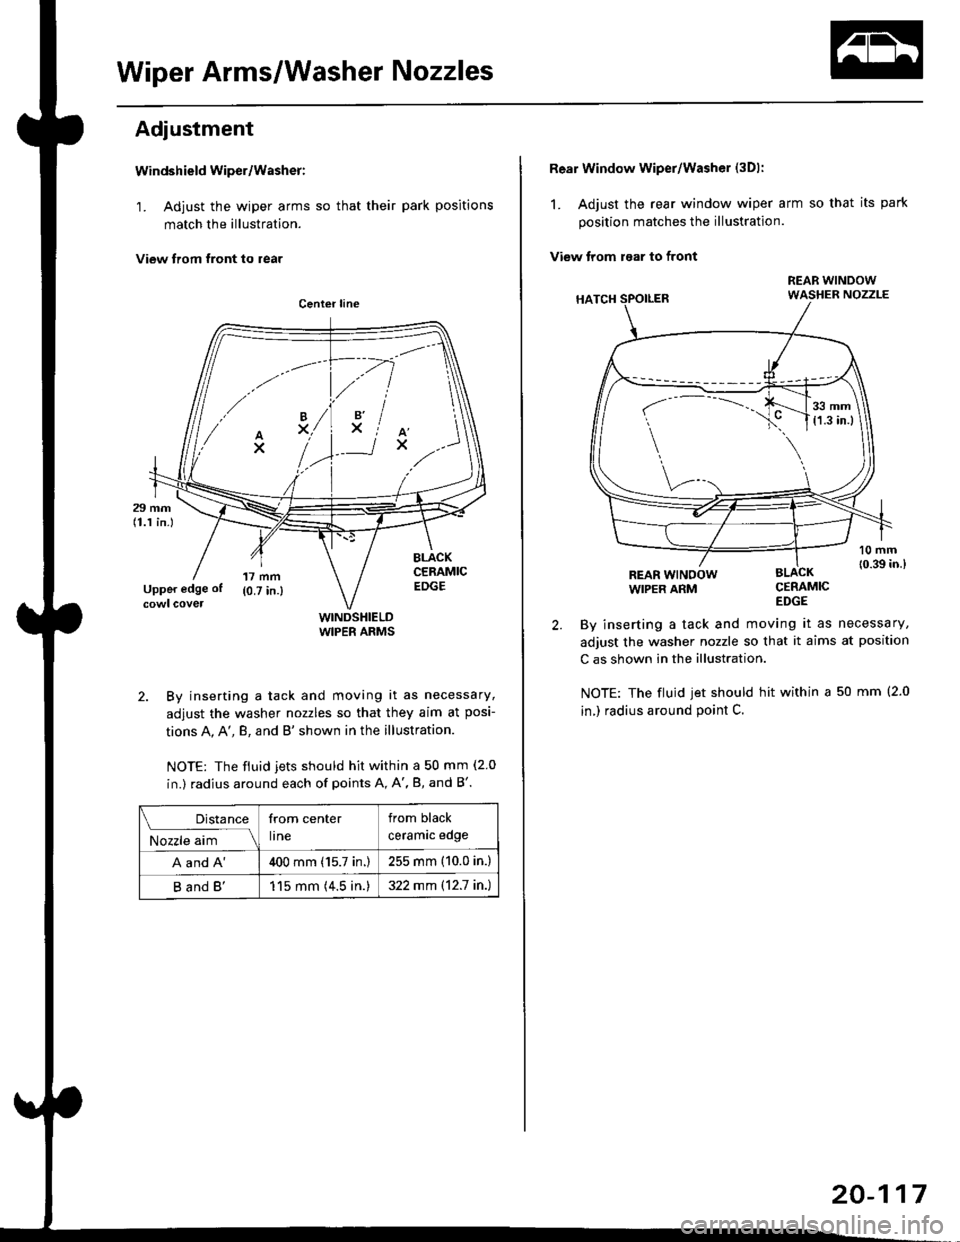 HONDA CIVIC 1996 6.G Workshop Manual Wiper Arms/Washer Nozzles
Adjustment
Windshield wiper/Washer:
1. Adjust the wiper arms so that their park positions
match the illustration.
View trom tront to rear
WINDSHIELDWIPER ARMS
2. By inserting